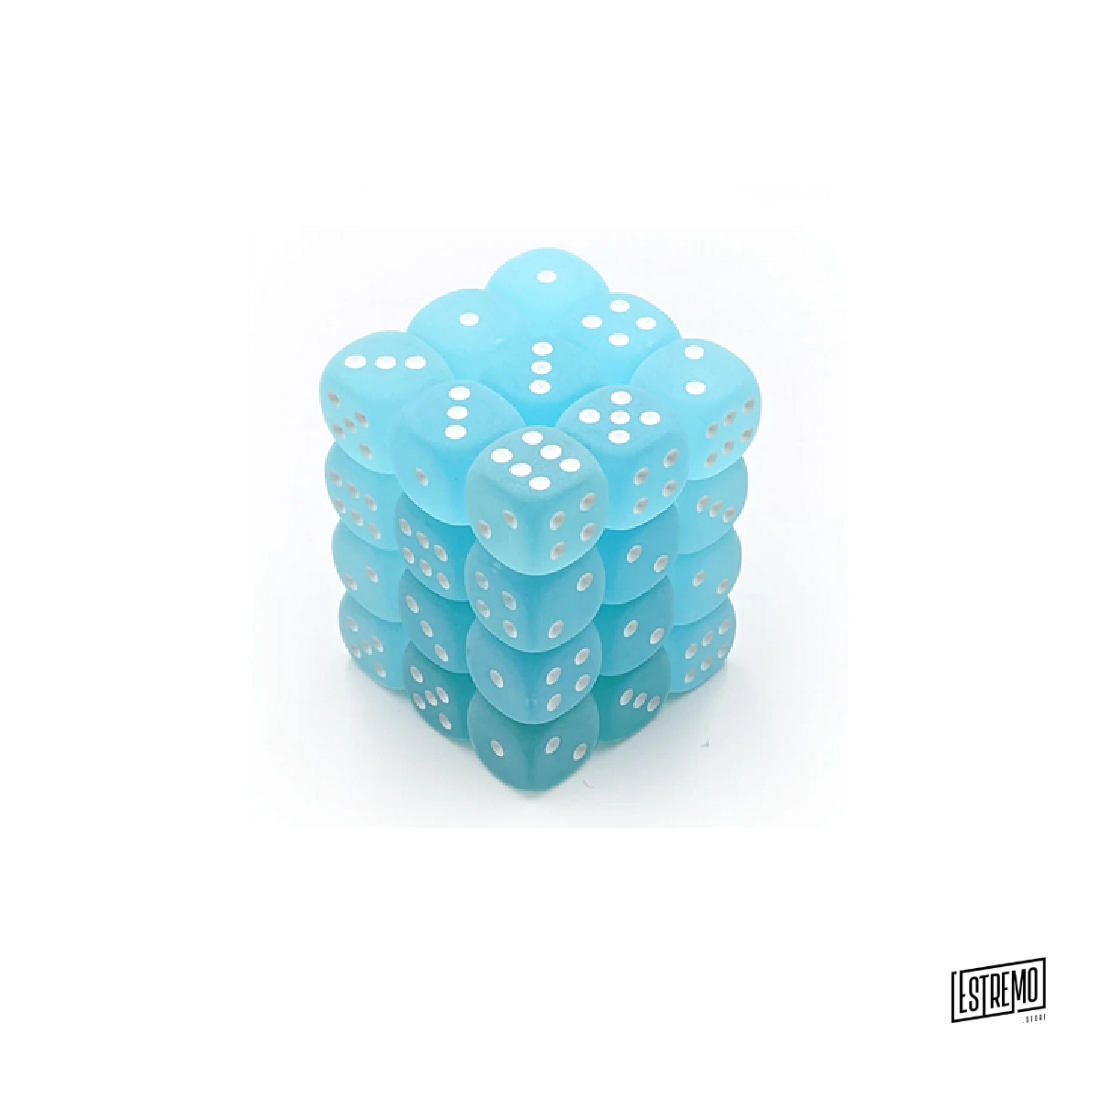 CHESSEX SIGNATURE 12MM D6 WITH PIPS DICE BLOCKS (36 DICE) - FROSTED TEAL W/WHITE